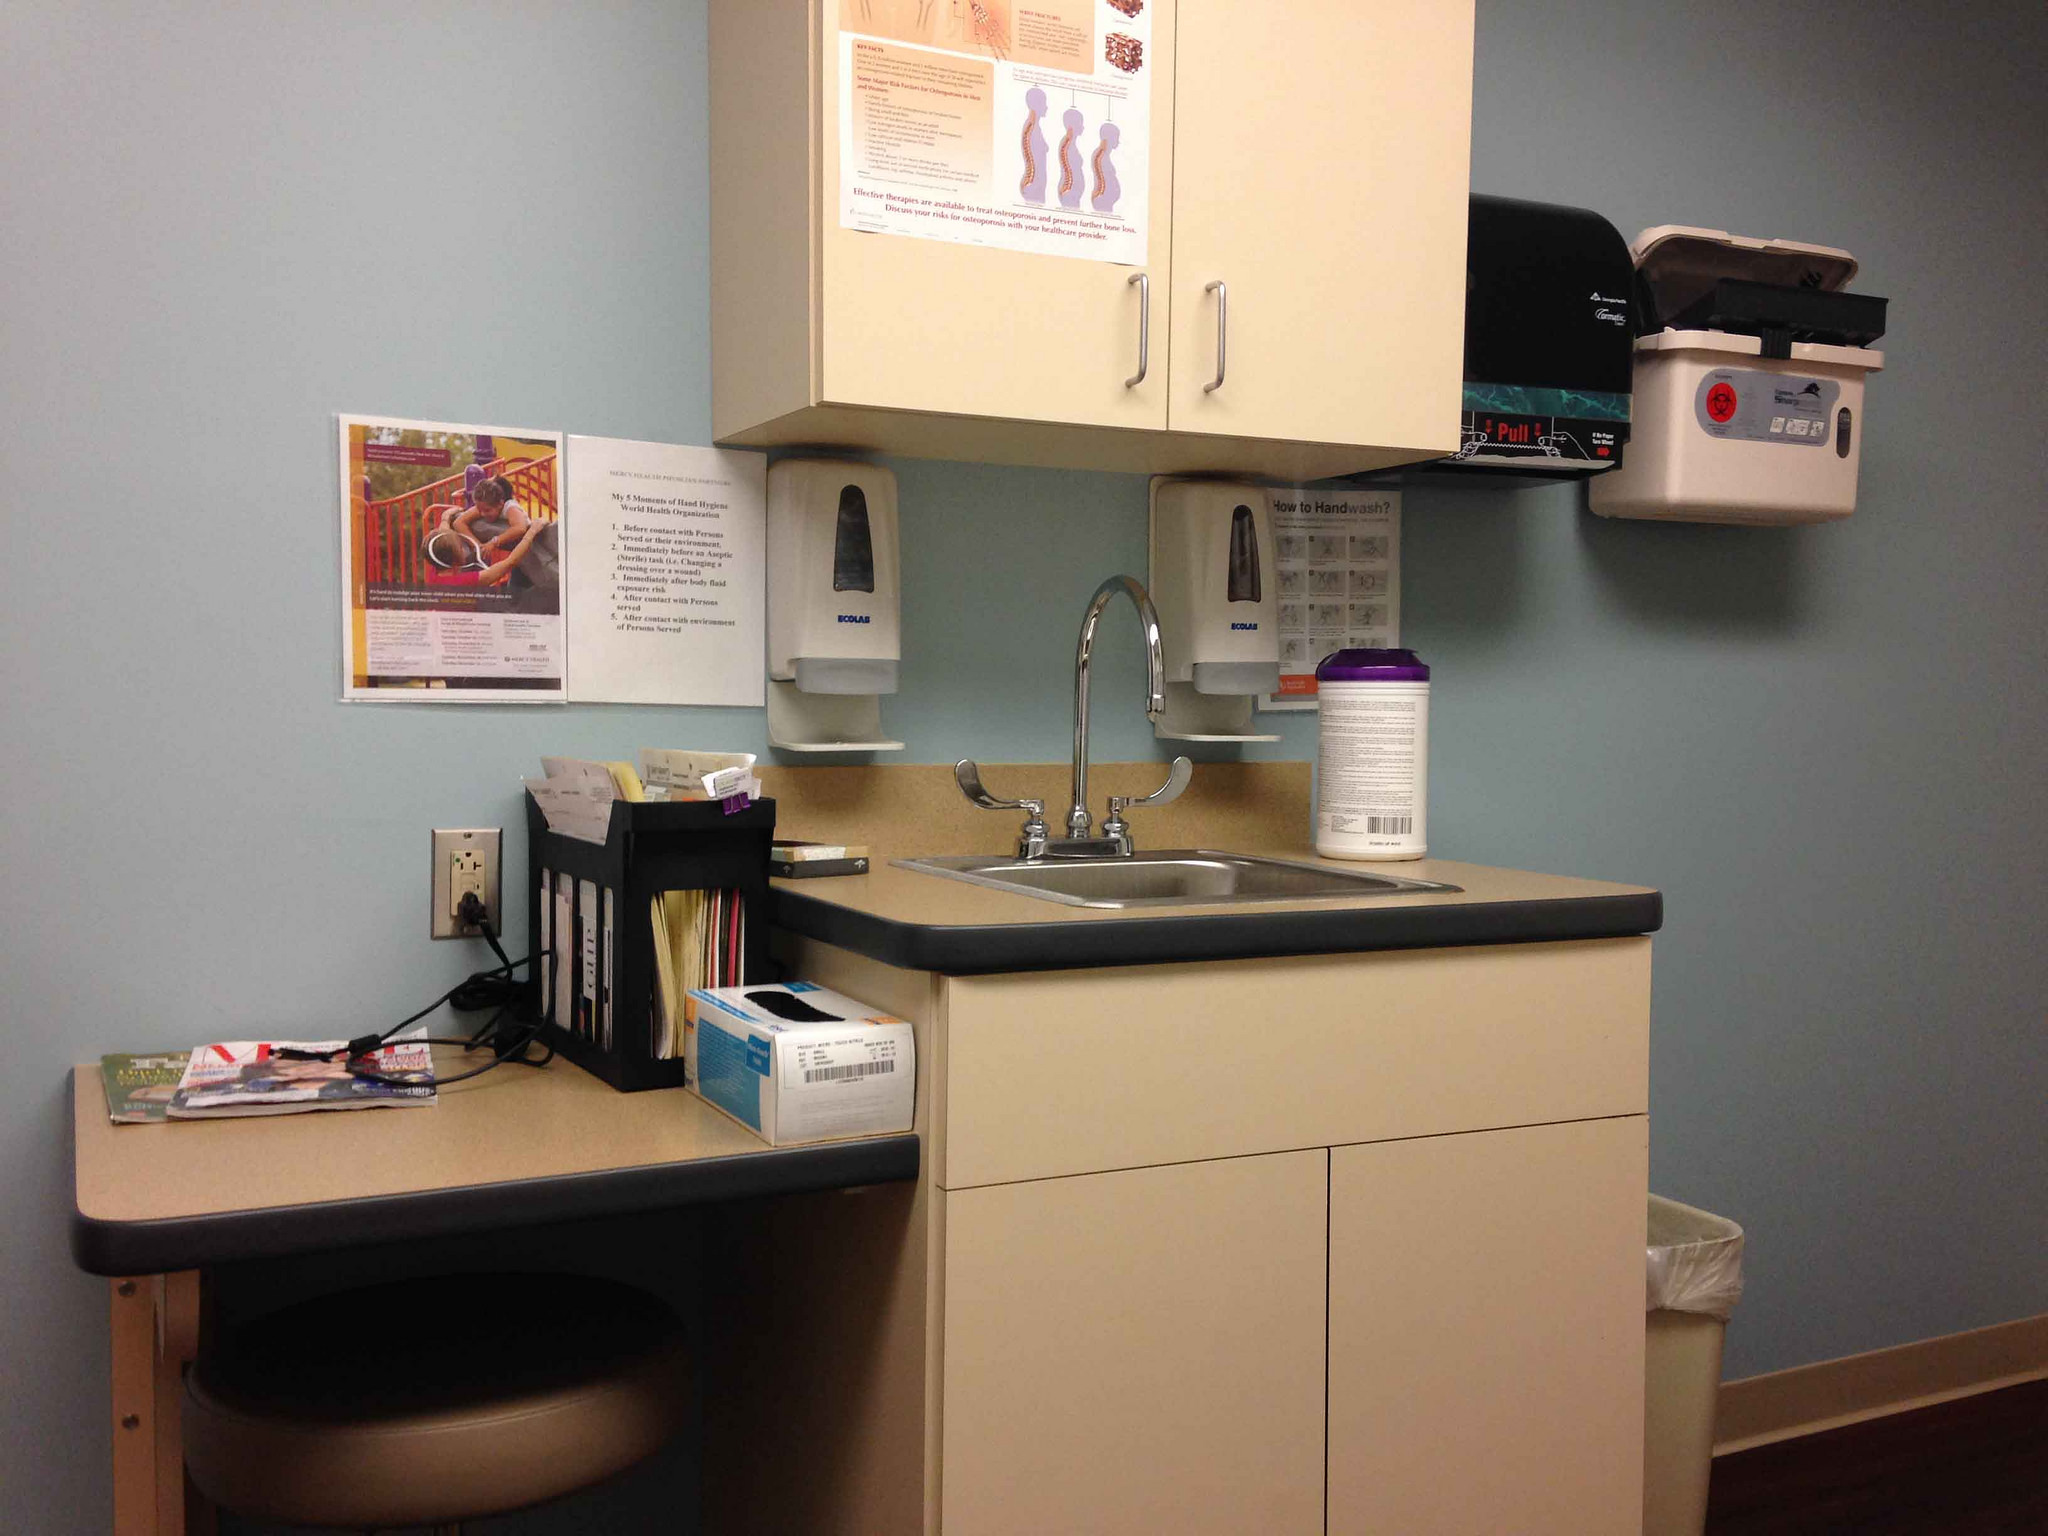 Photograph of an exam room in a doctor's office